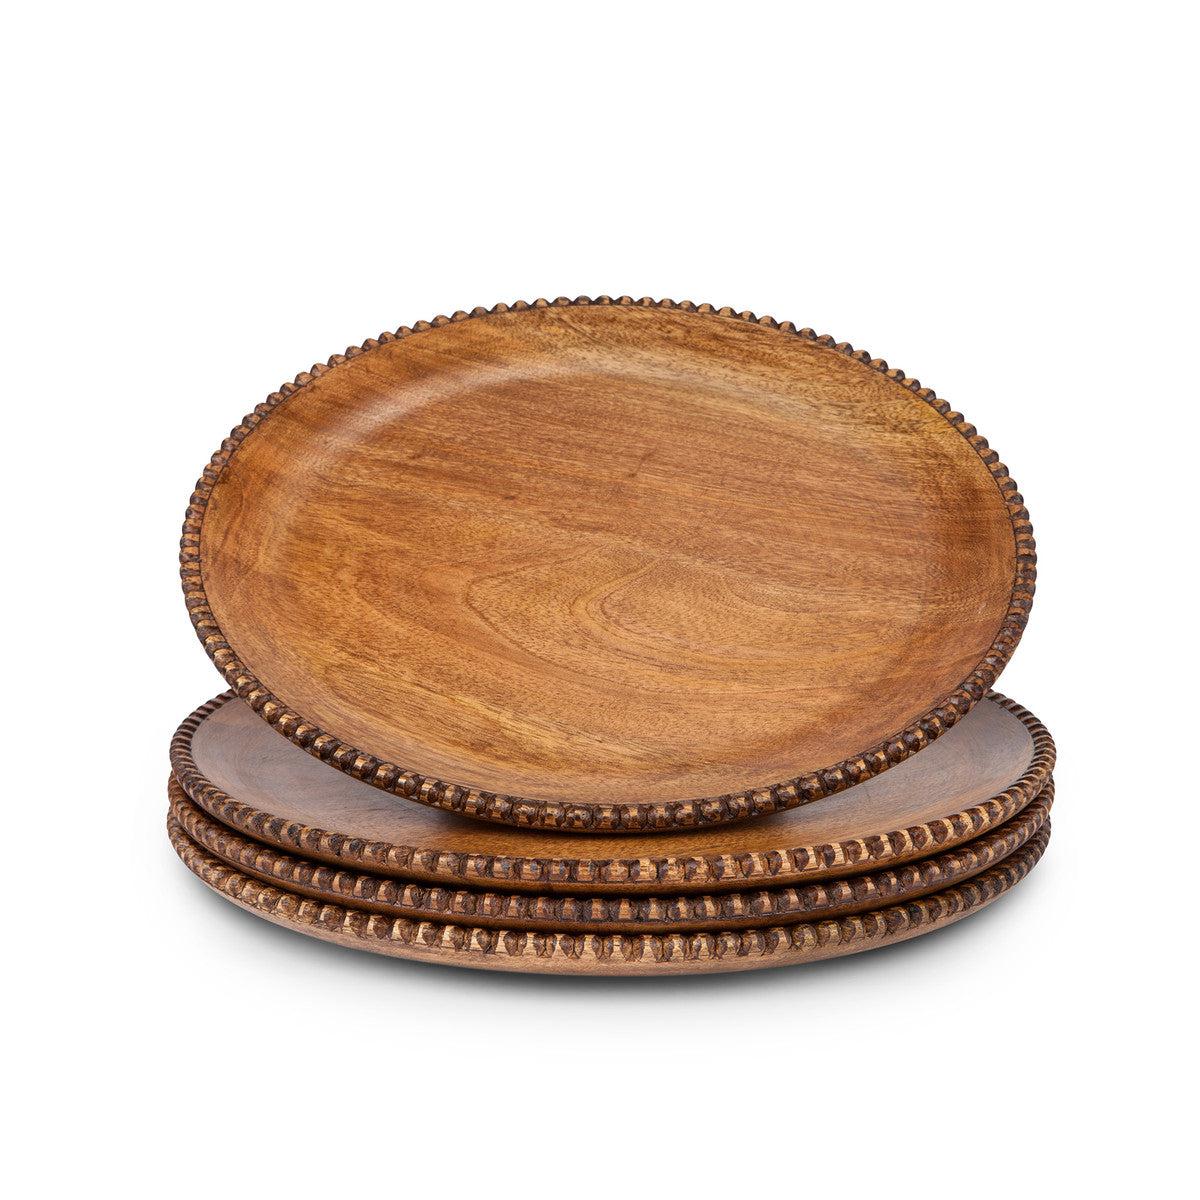 Heritage Wood Chargers, Set of 4-Charger Plates-tbgypsysoul